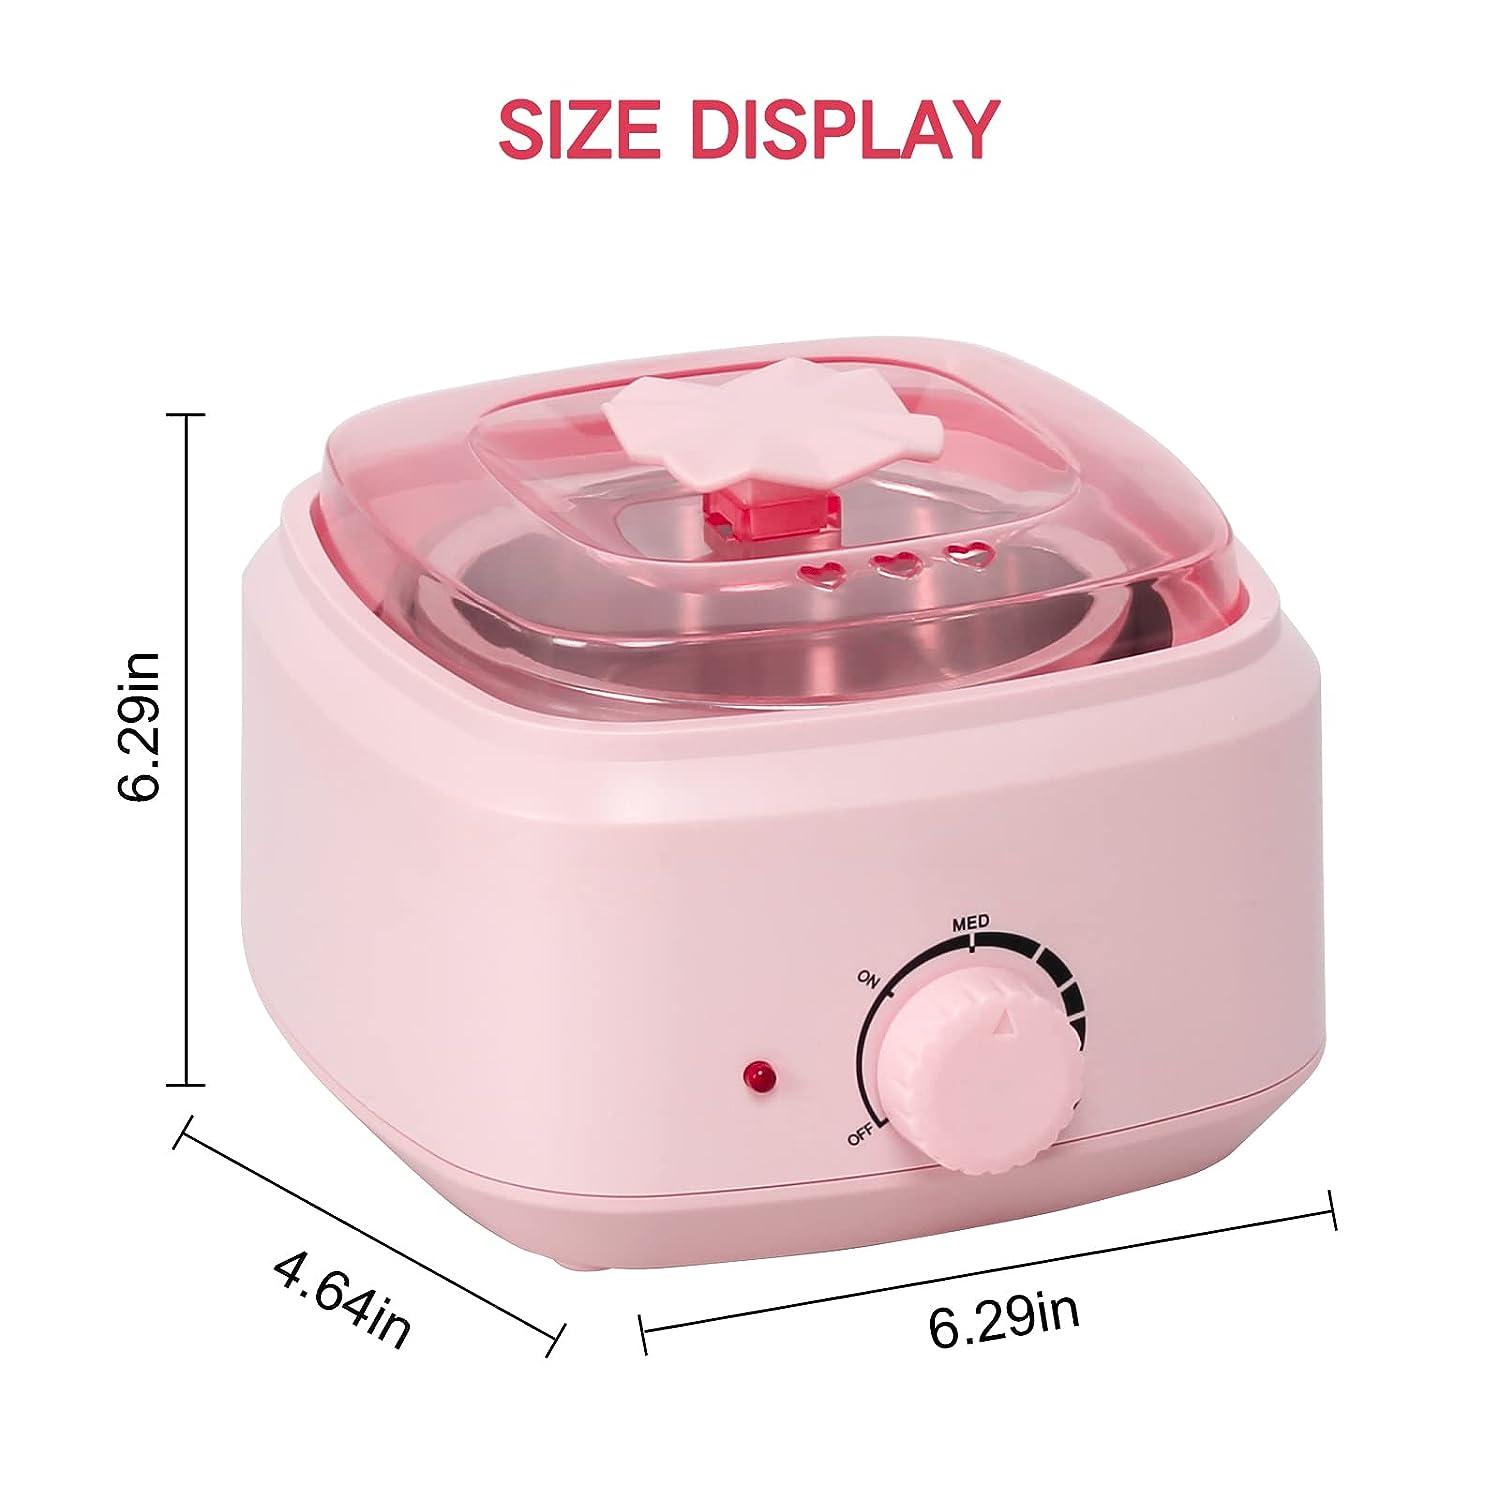 Electric Wax Warmer for Hair Removal - Black and Pink by Salon